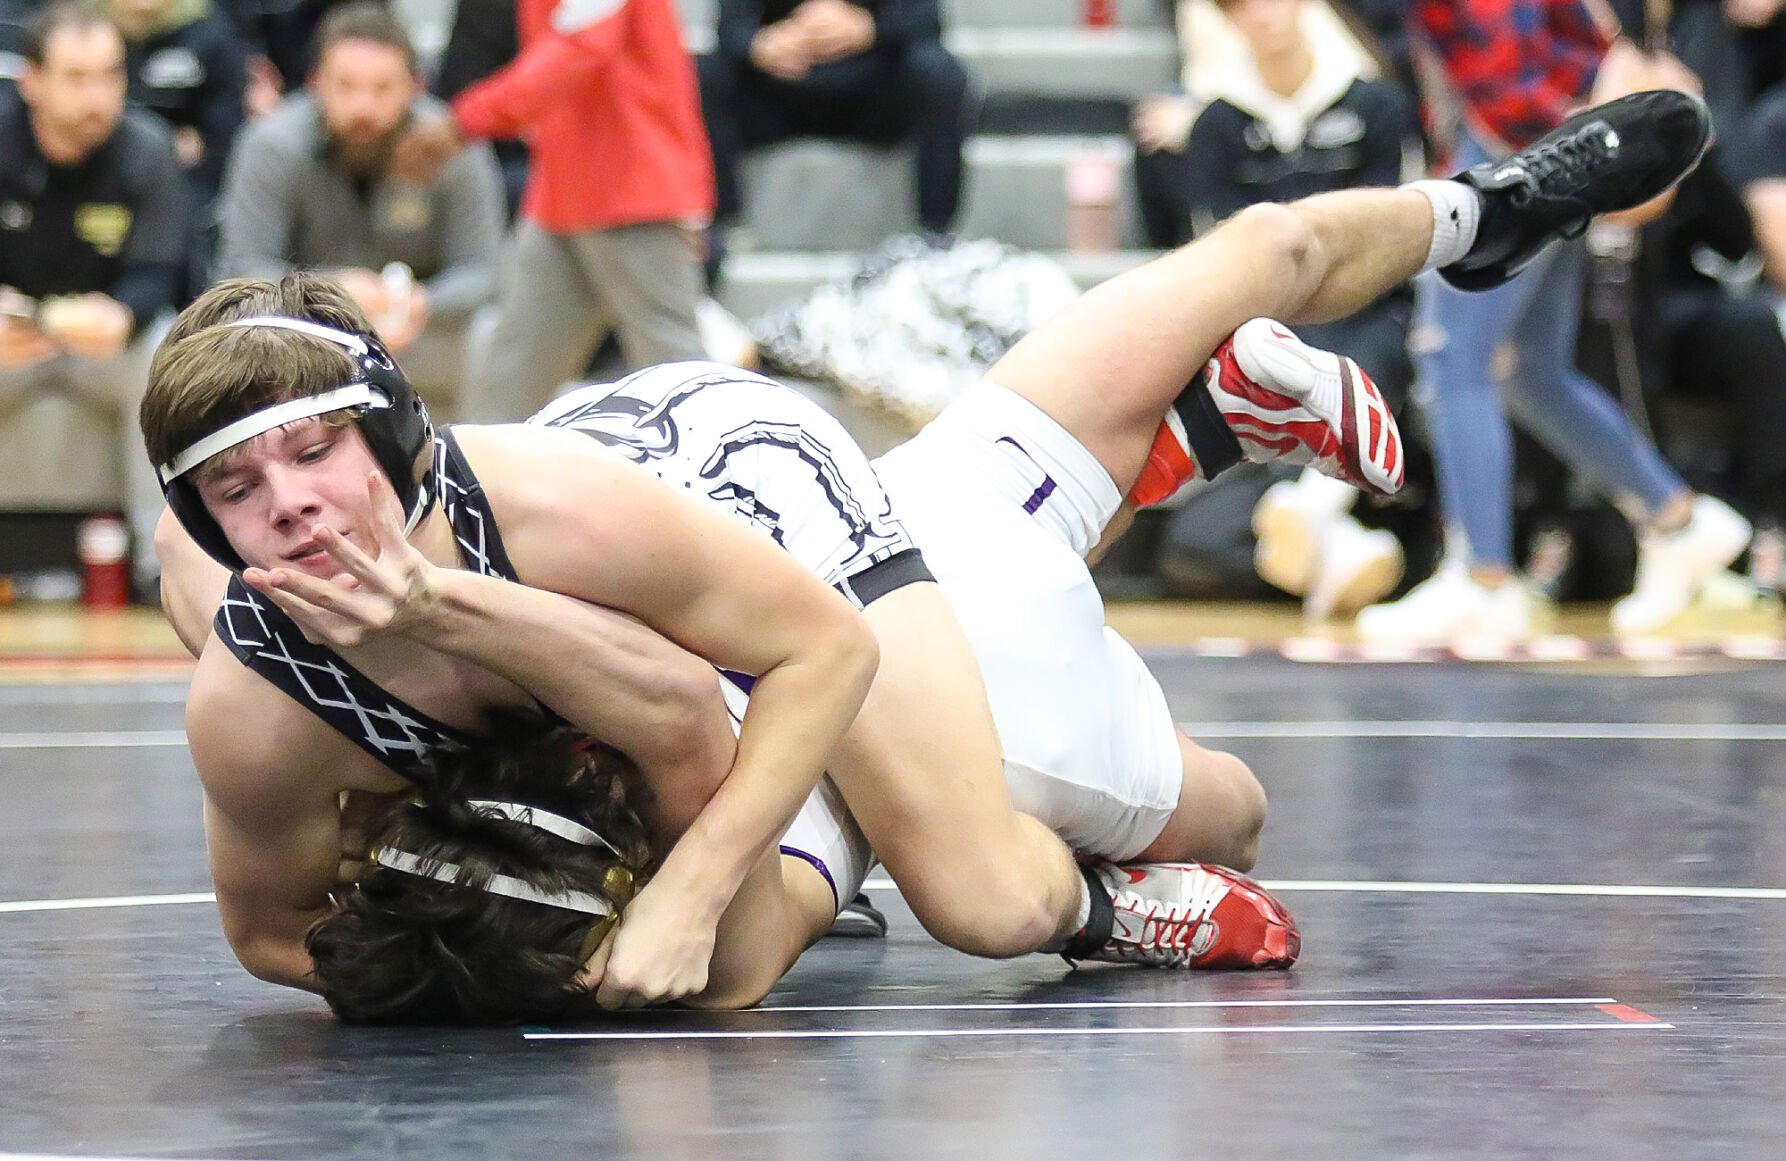 Boys wrestling spotlight Triads Crouch wastes no time on or off the image image